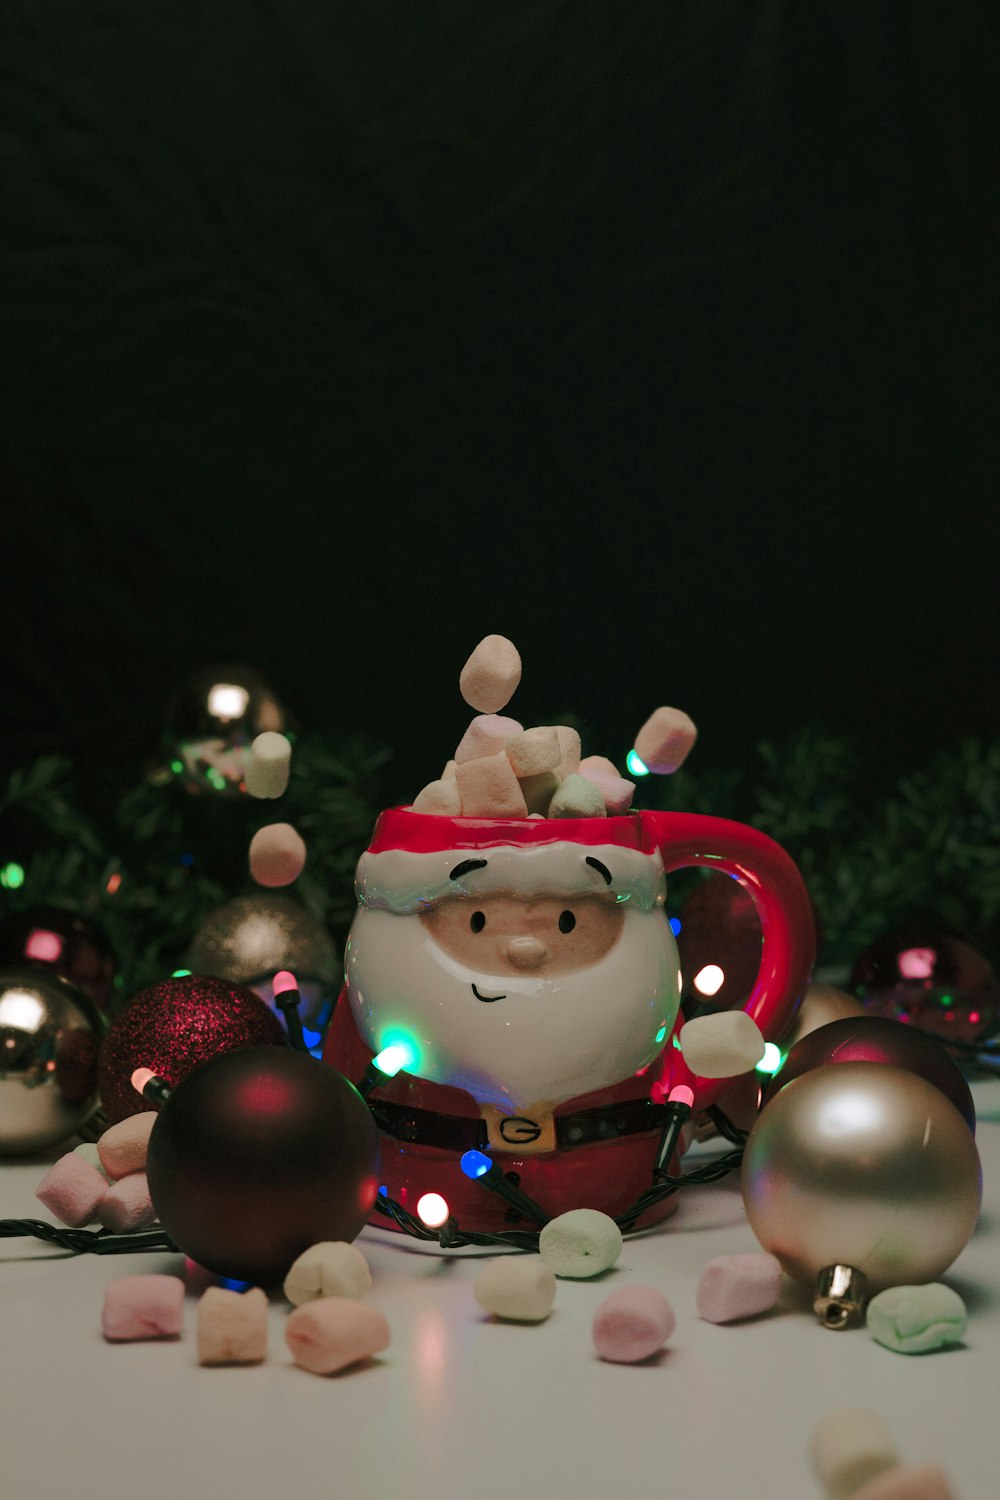 santa claus figurine with red baubles